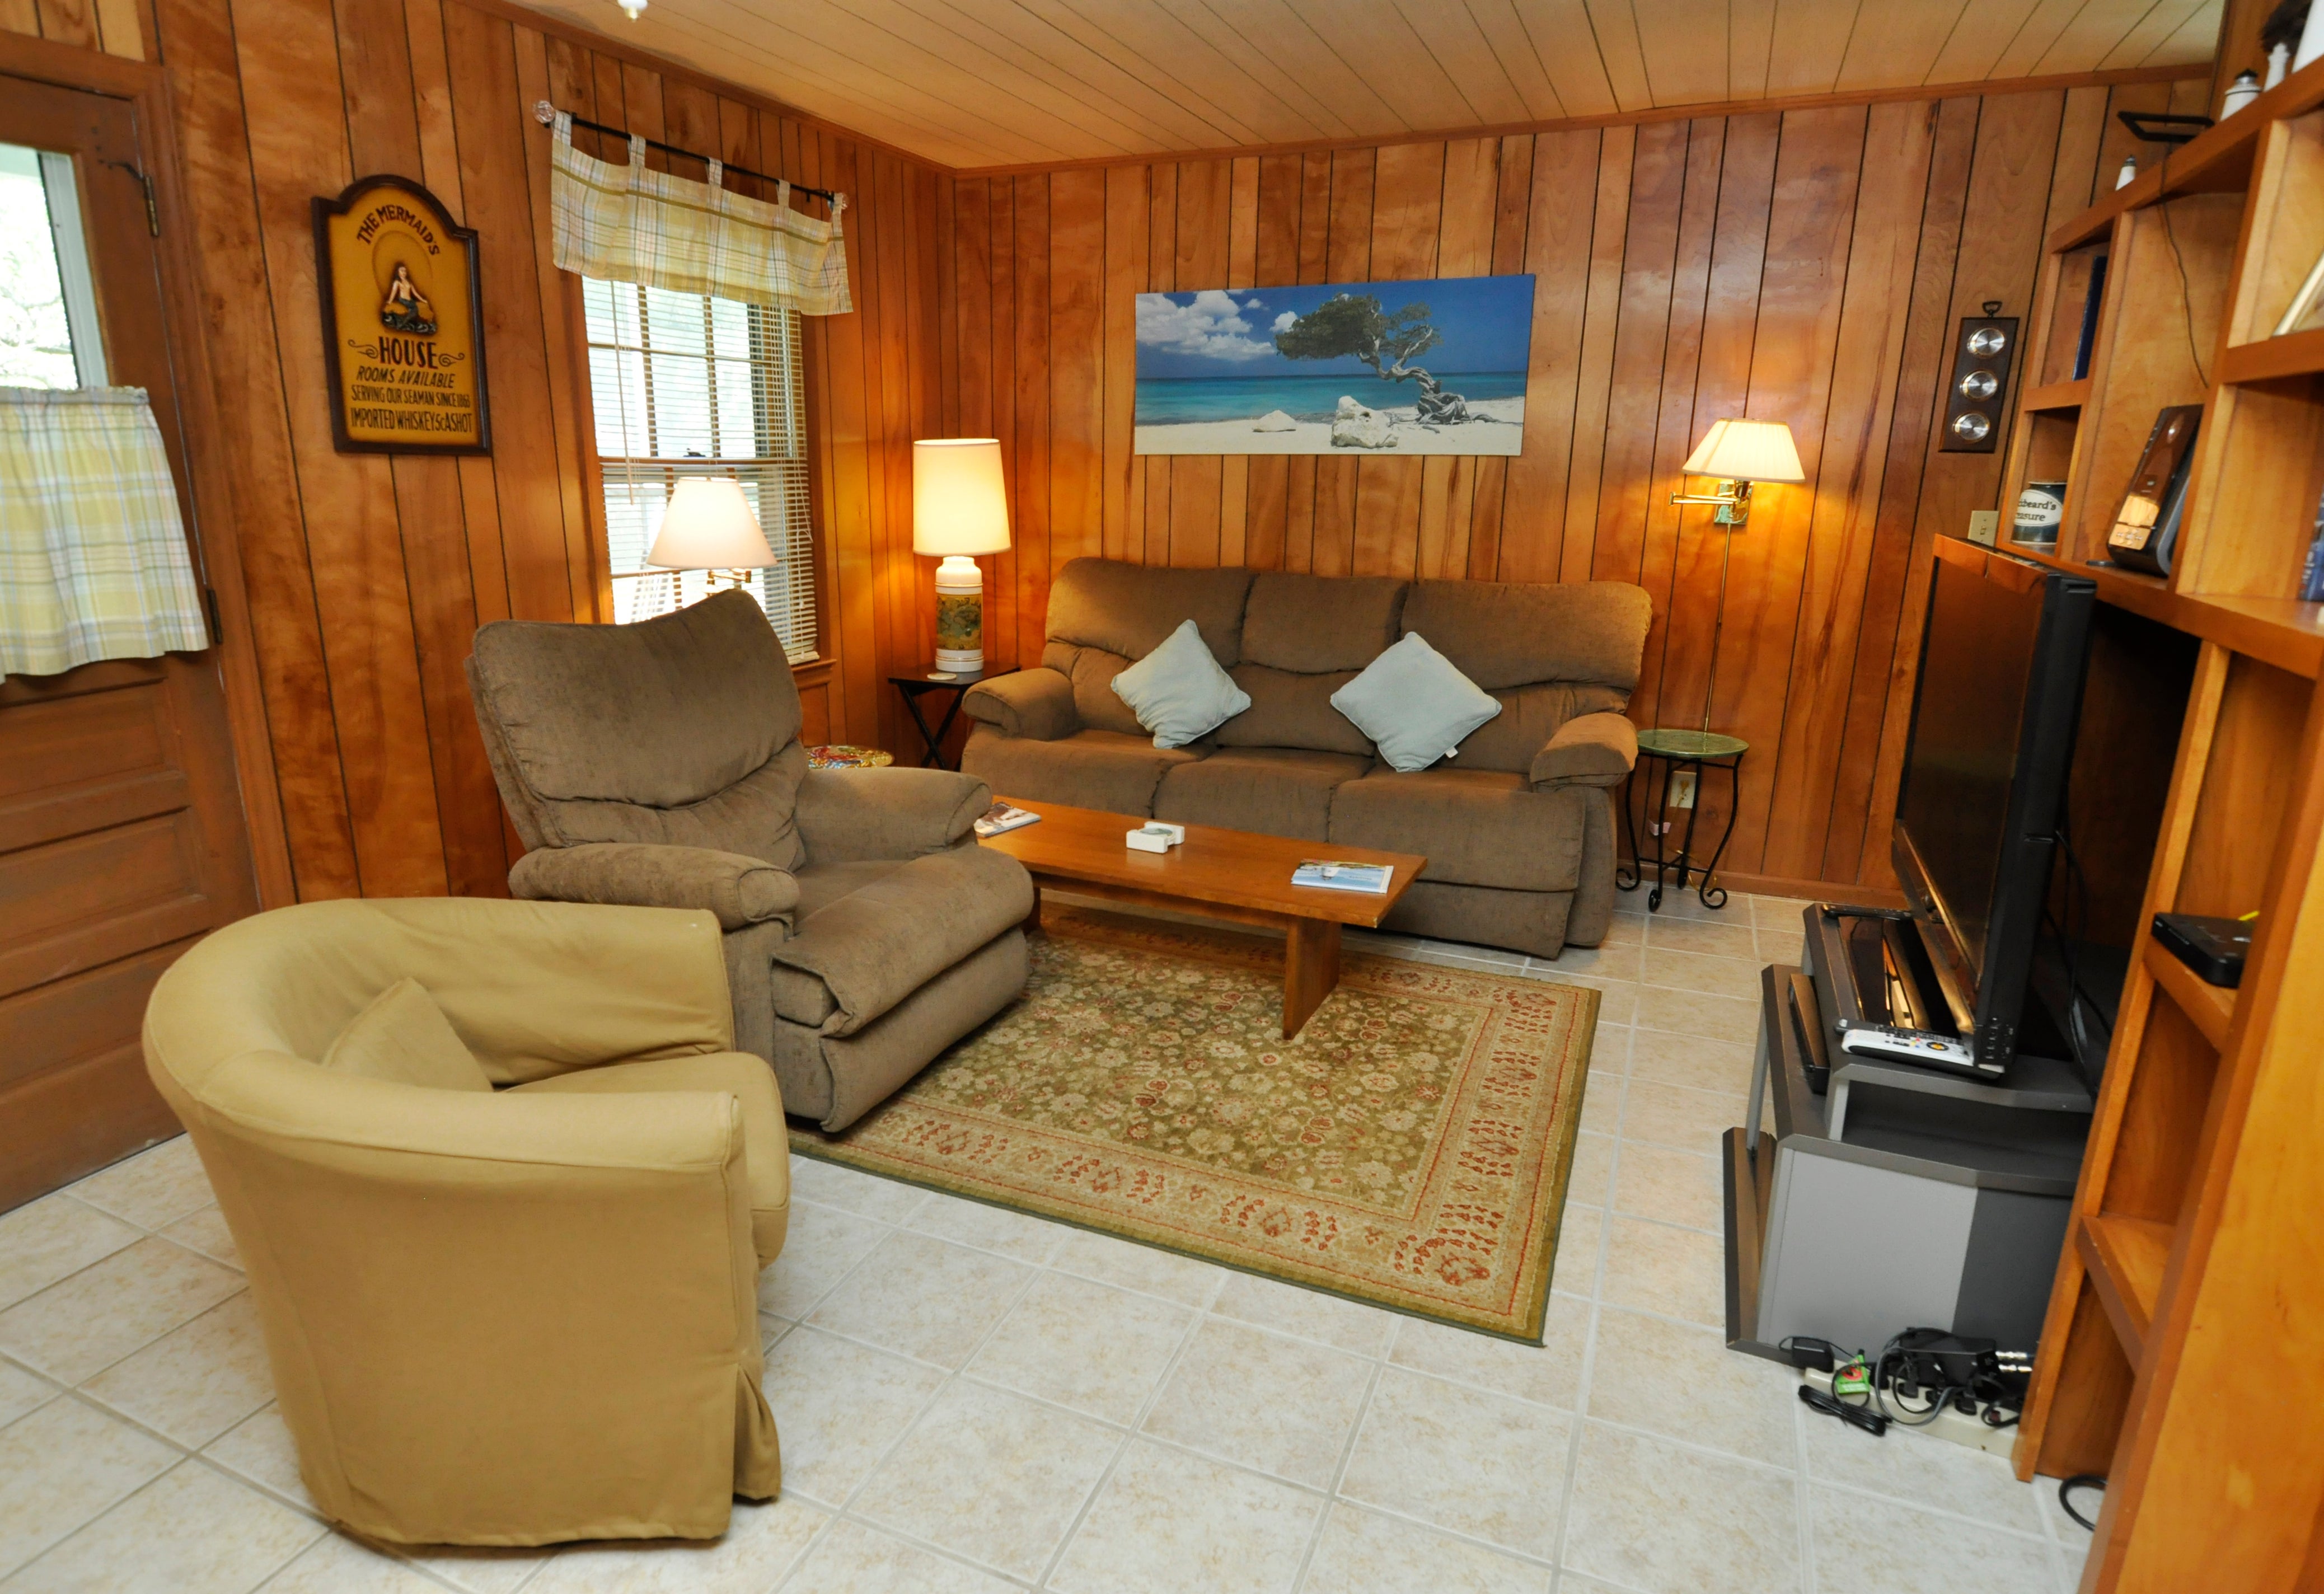 Living Area with TV, First Floor with Screened Porch Access